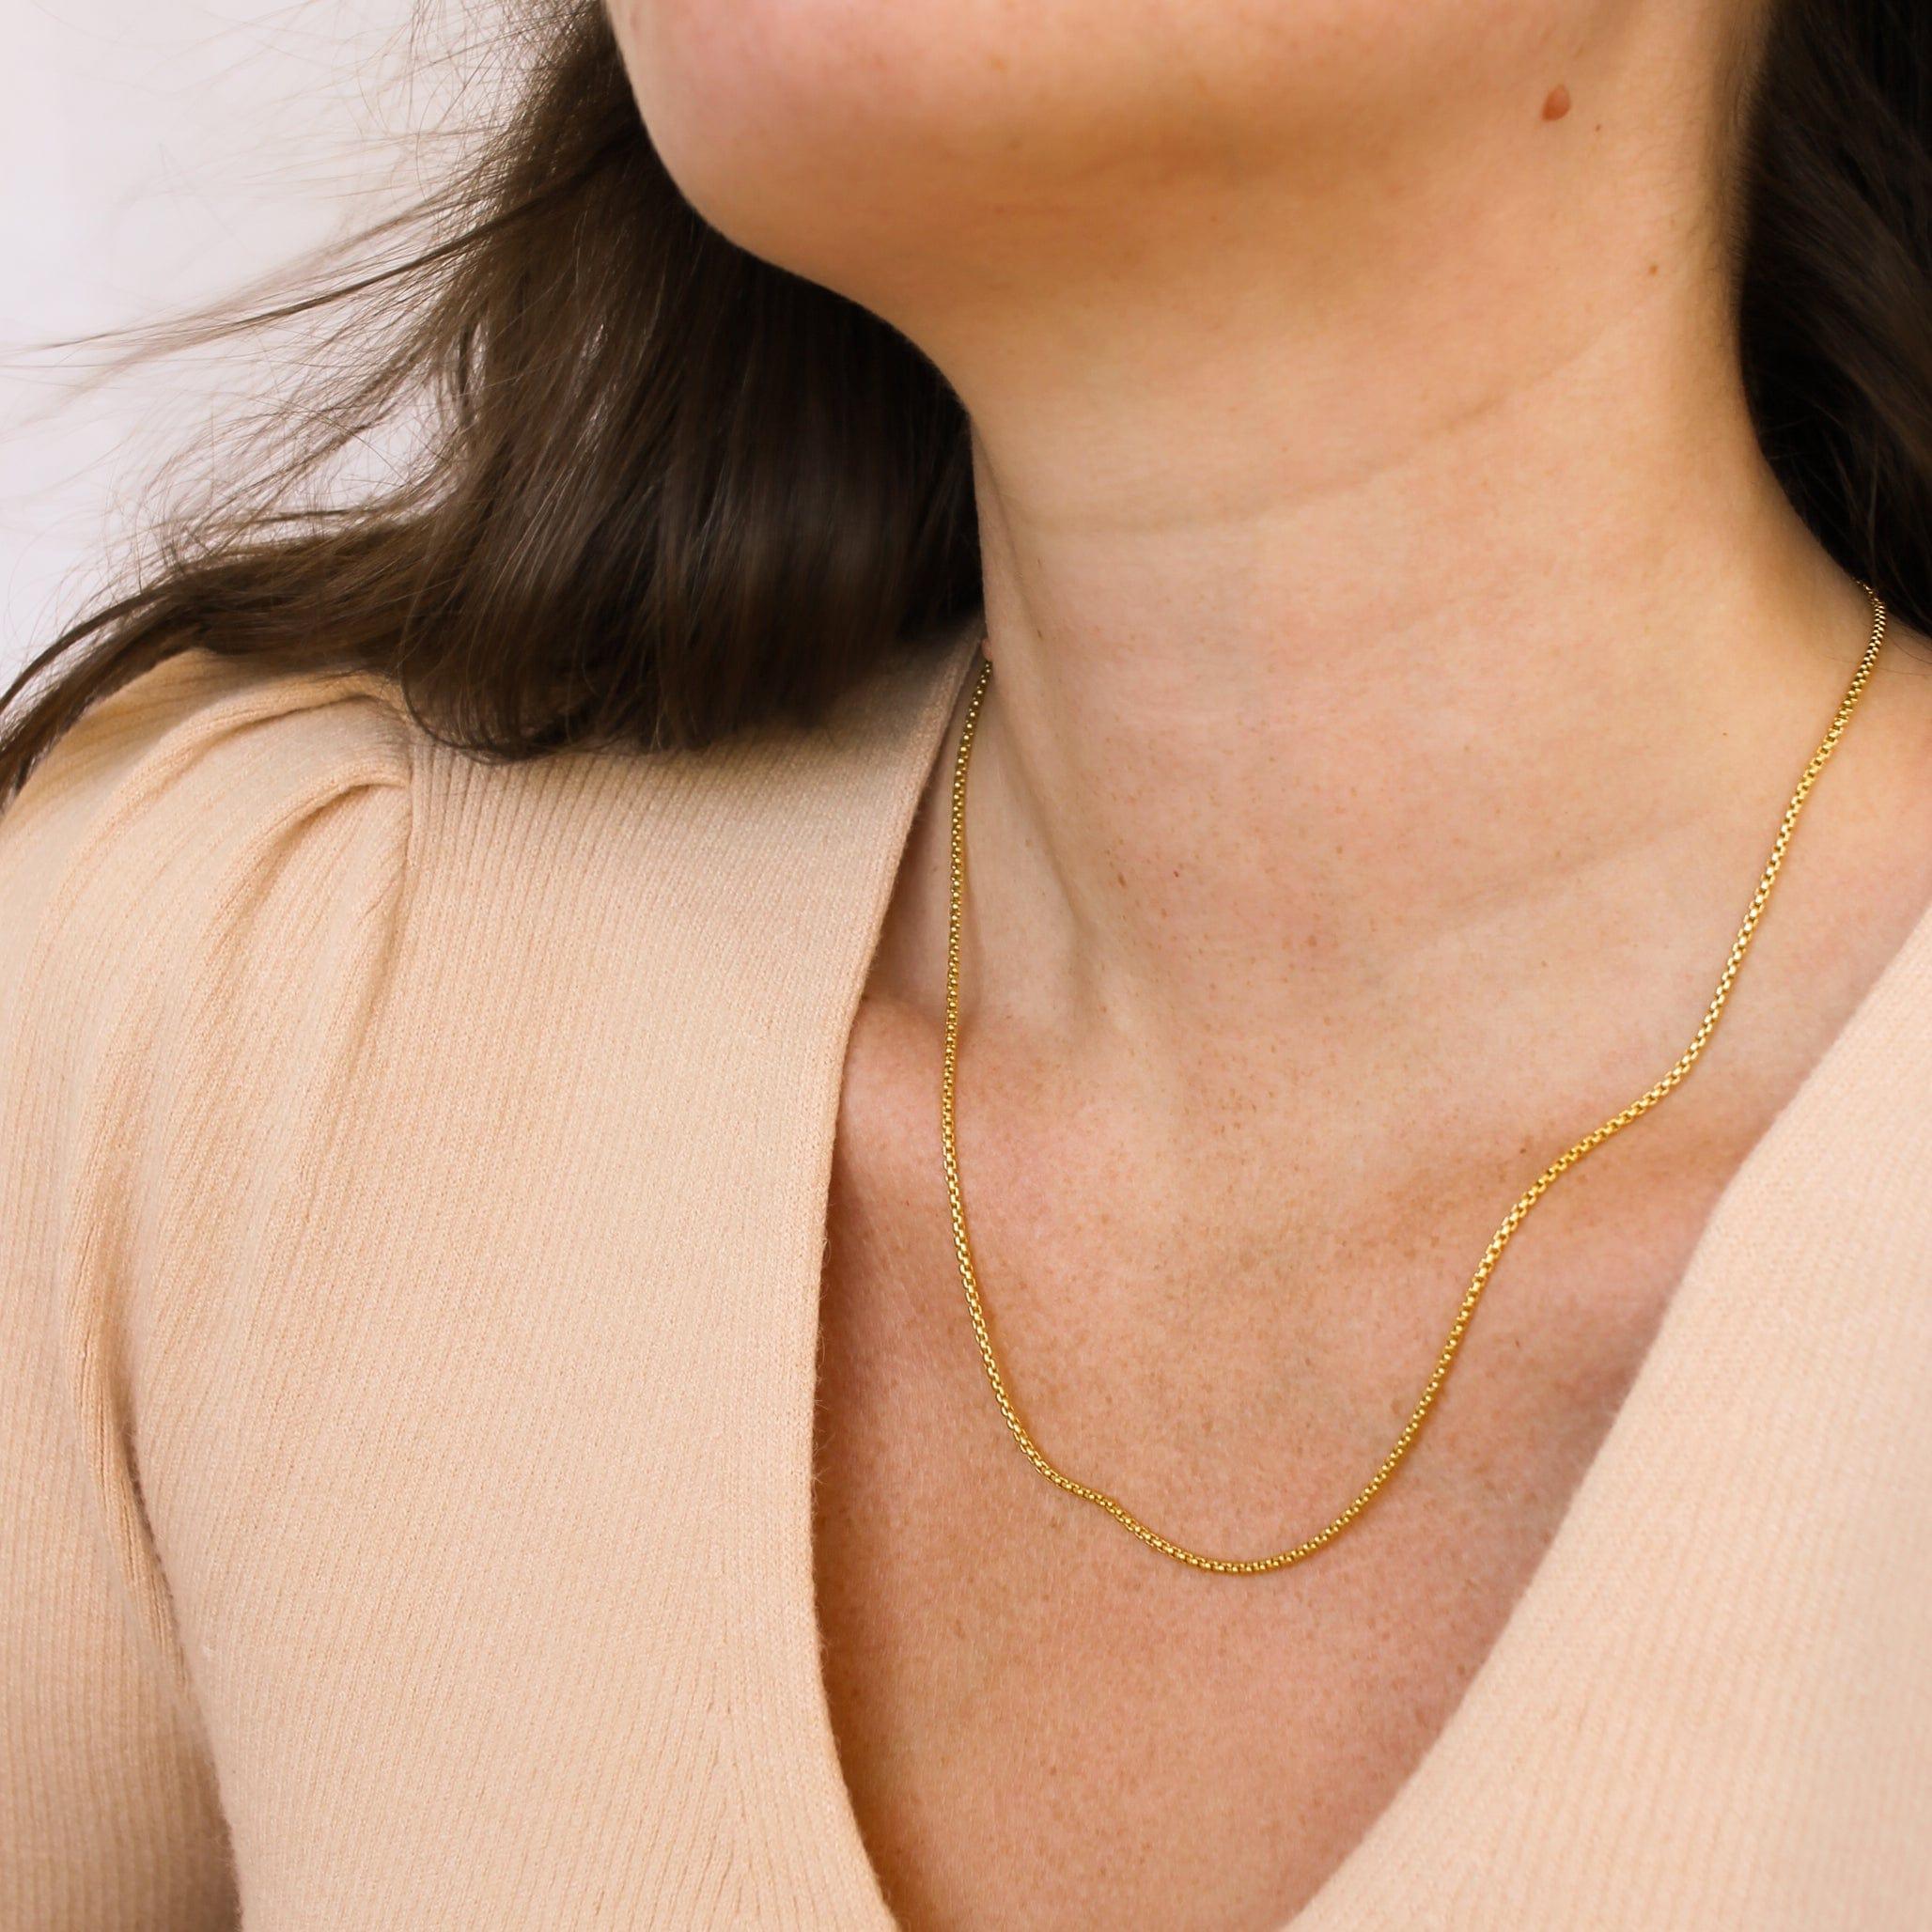 Box Chain Necklace - Nolia Jewelry - Meaningful + Sustainably Handcrafted Jewelry